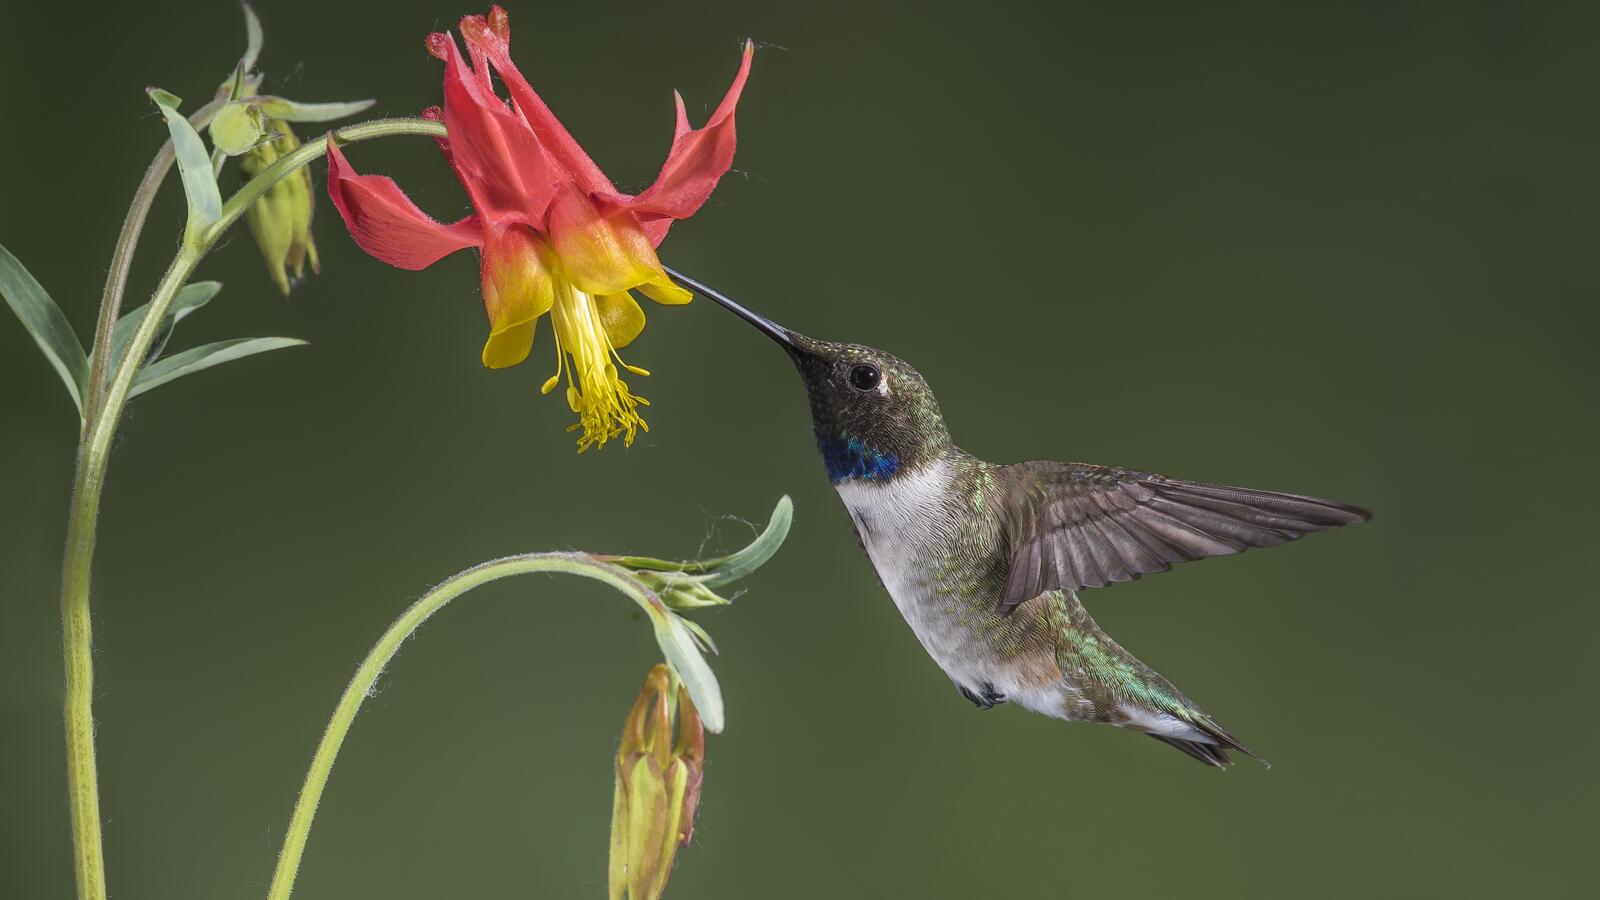 Free photo A hummingbird eats nectar from a flower with its long beak